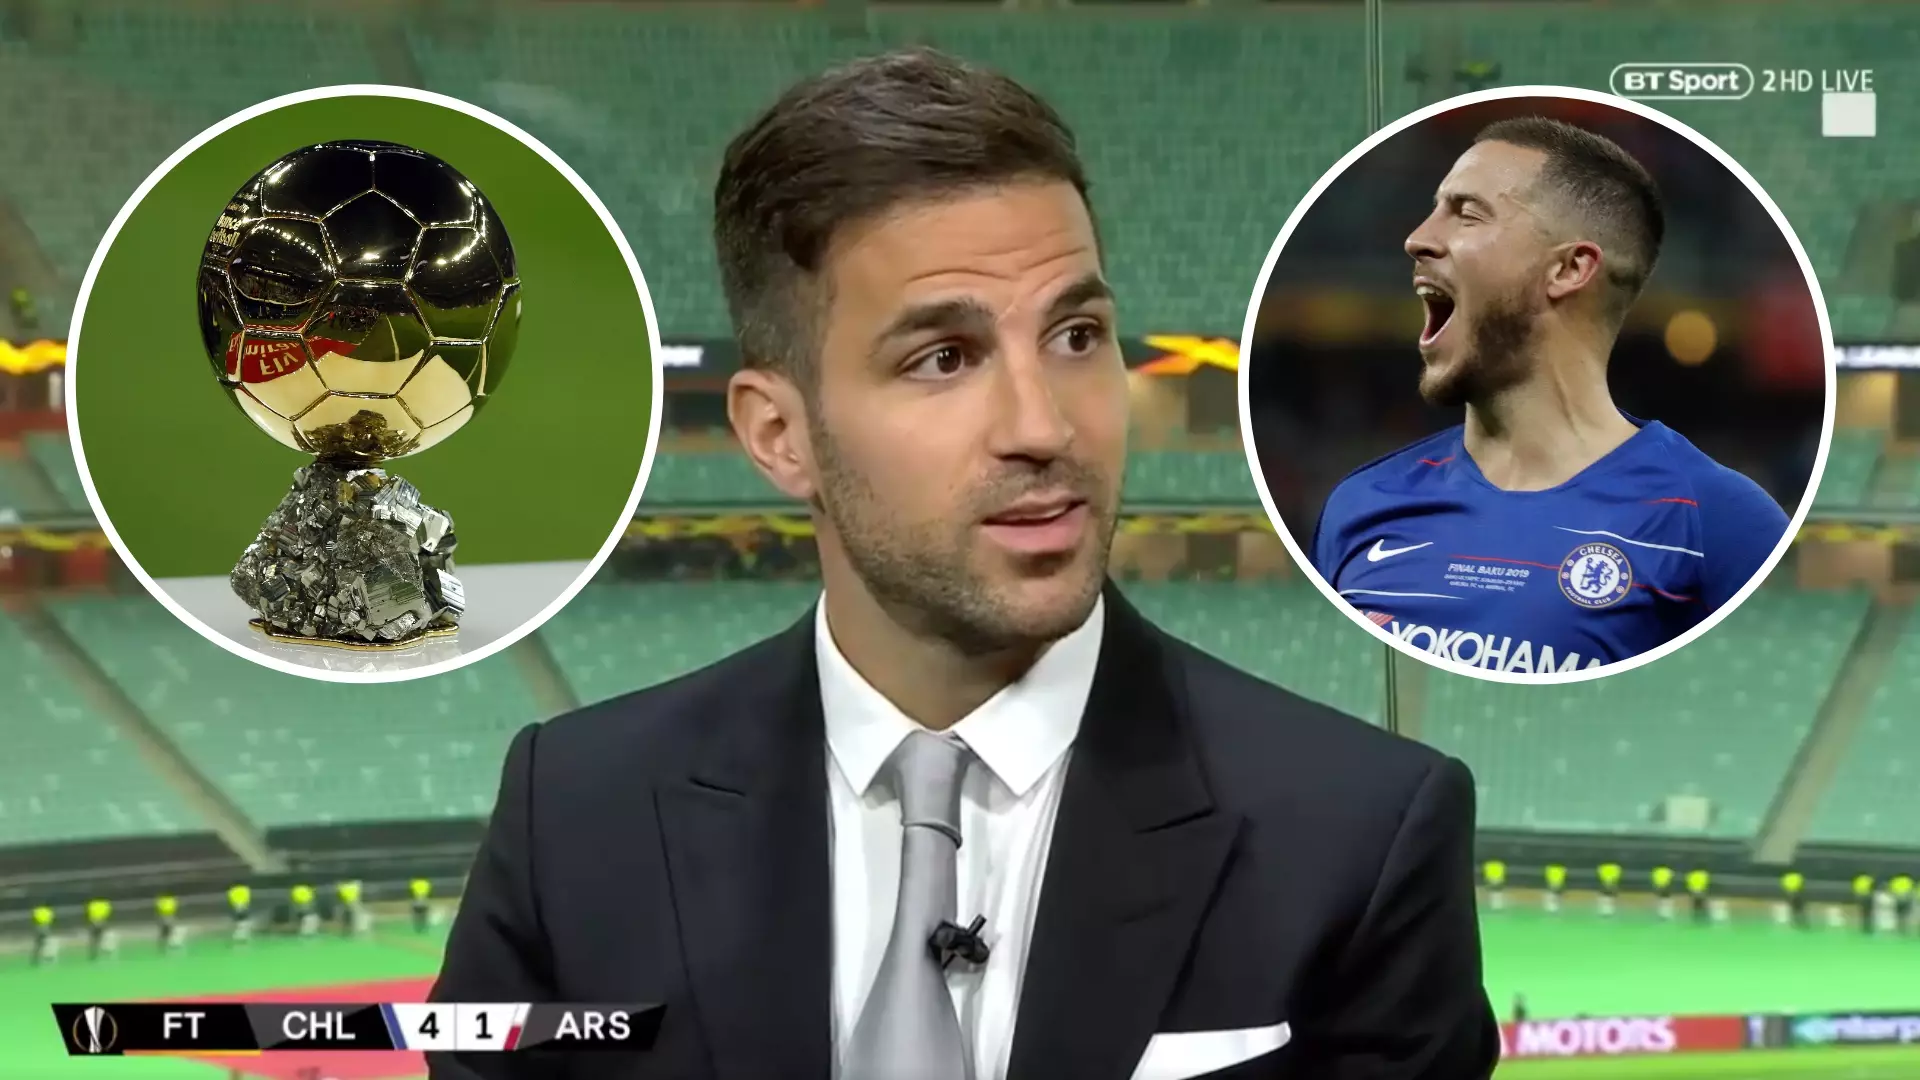 Eden Hazard Could Challenge For The Ballon d'Or At Real Madrid, Says Cesc Fàbregas